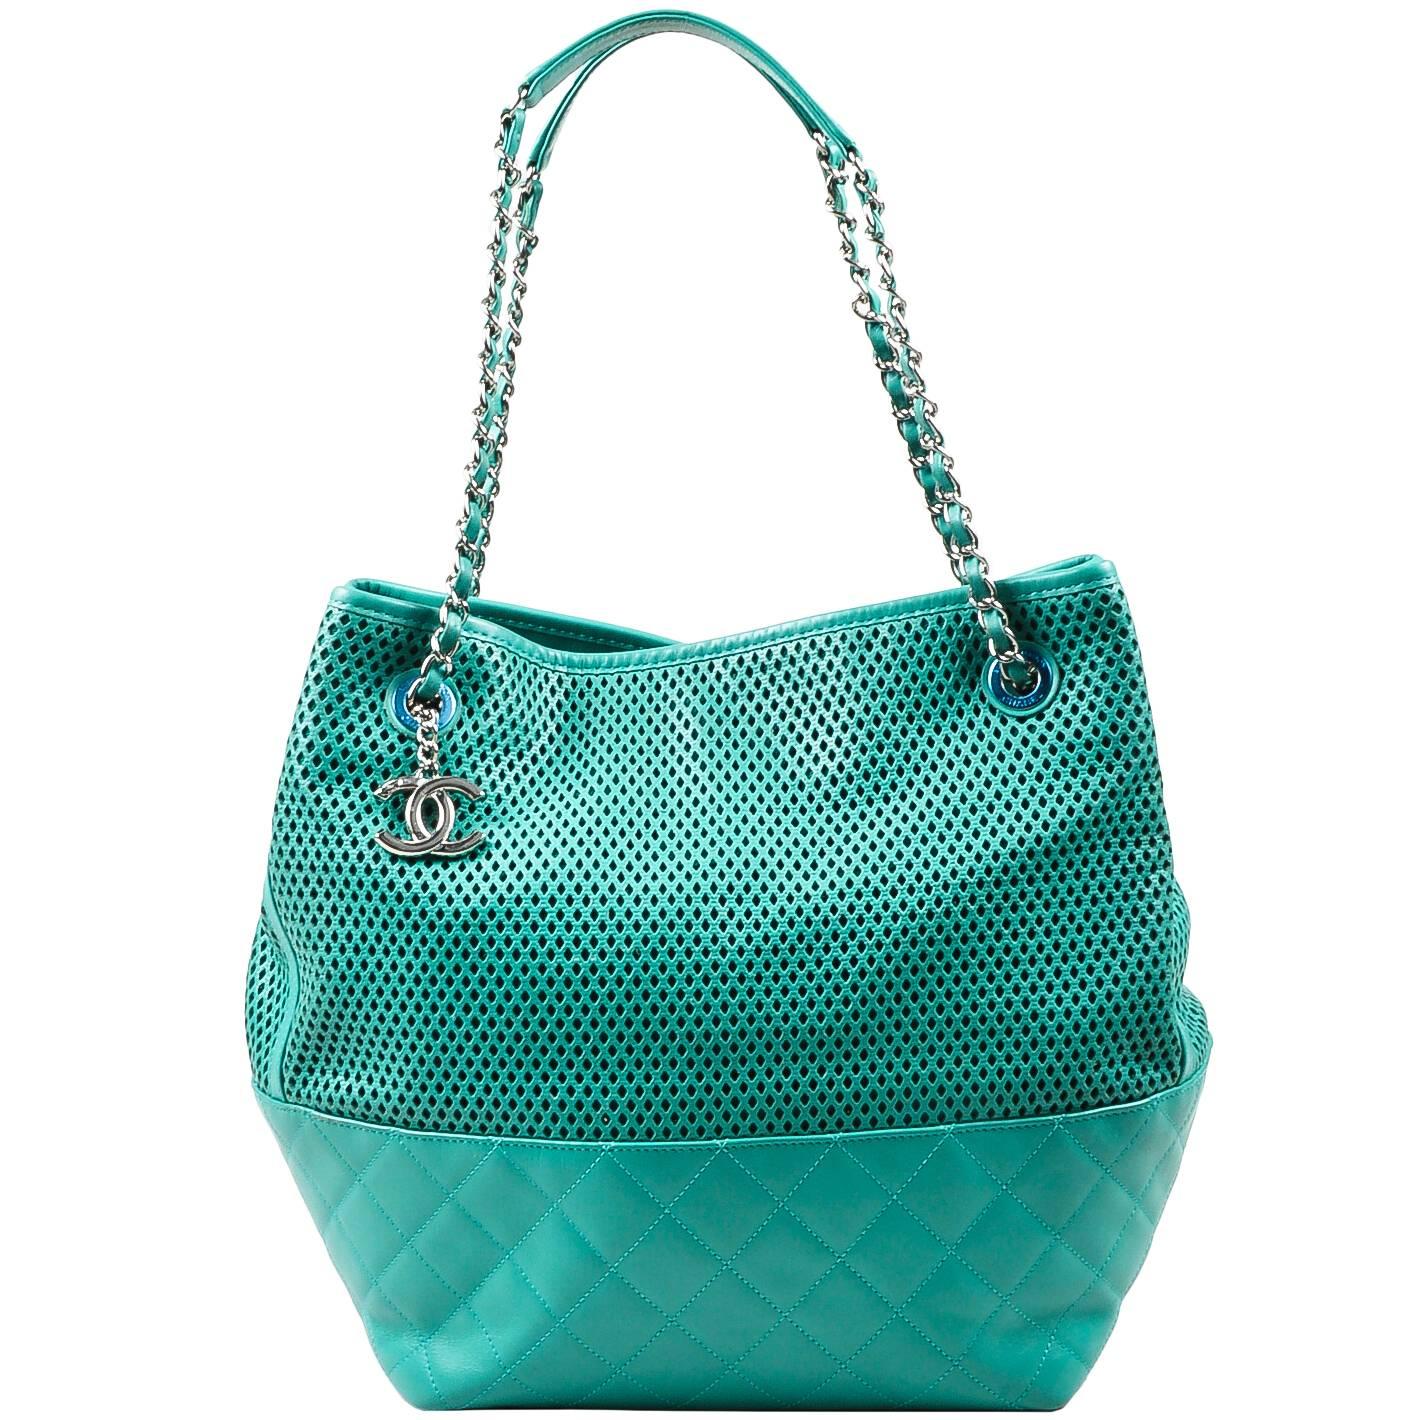 Chanel Teal Leather Perforated Quilted "Up in the Air" Chain Handle Tote Bag For Sale